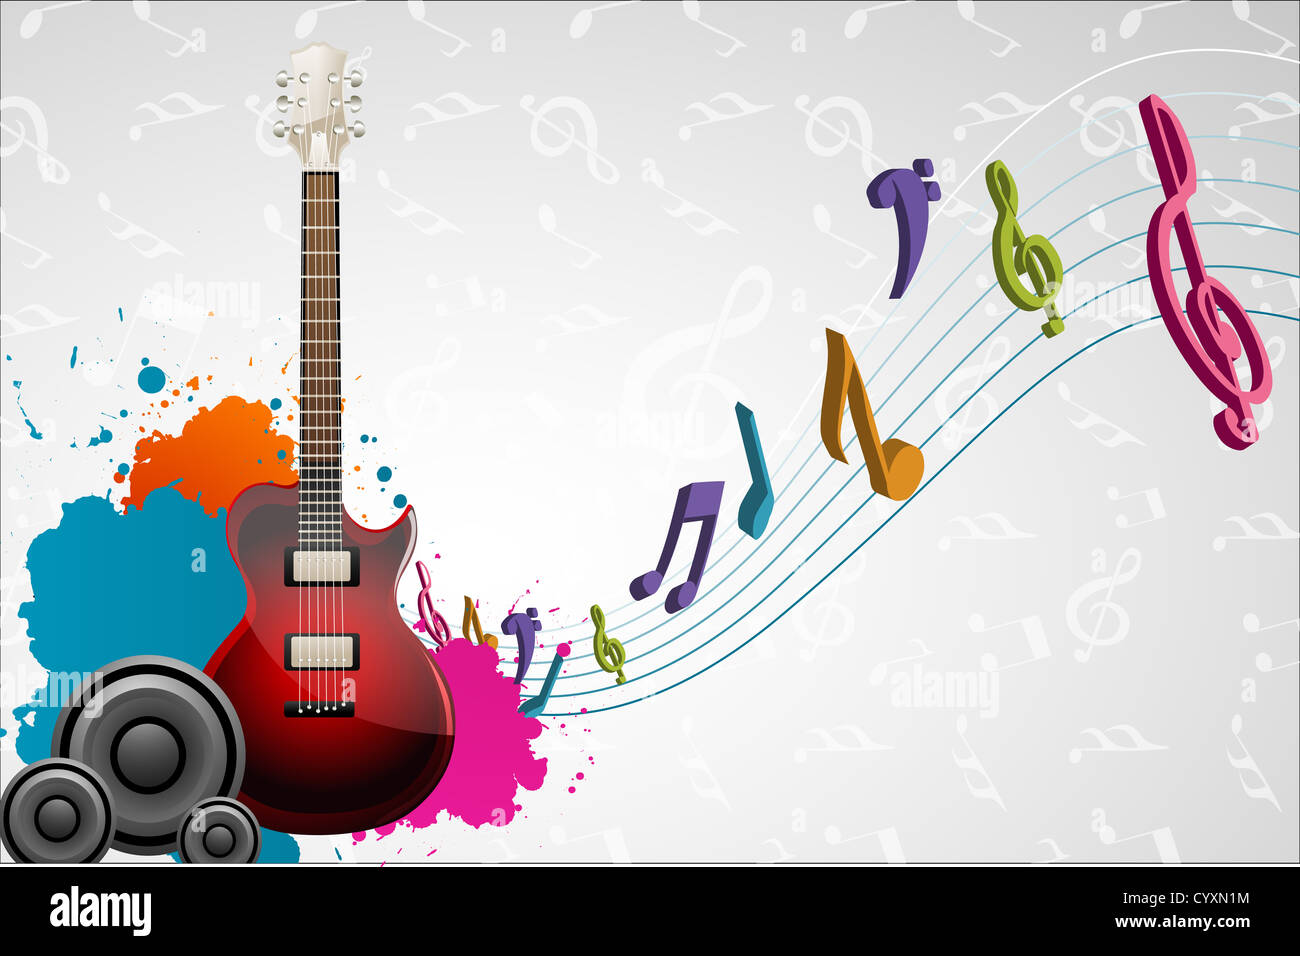 illustration of guitar with musical notes on abstract musical background Stock Photo